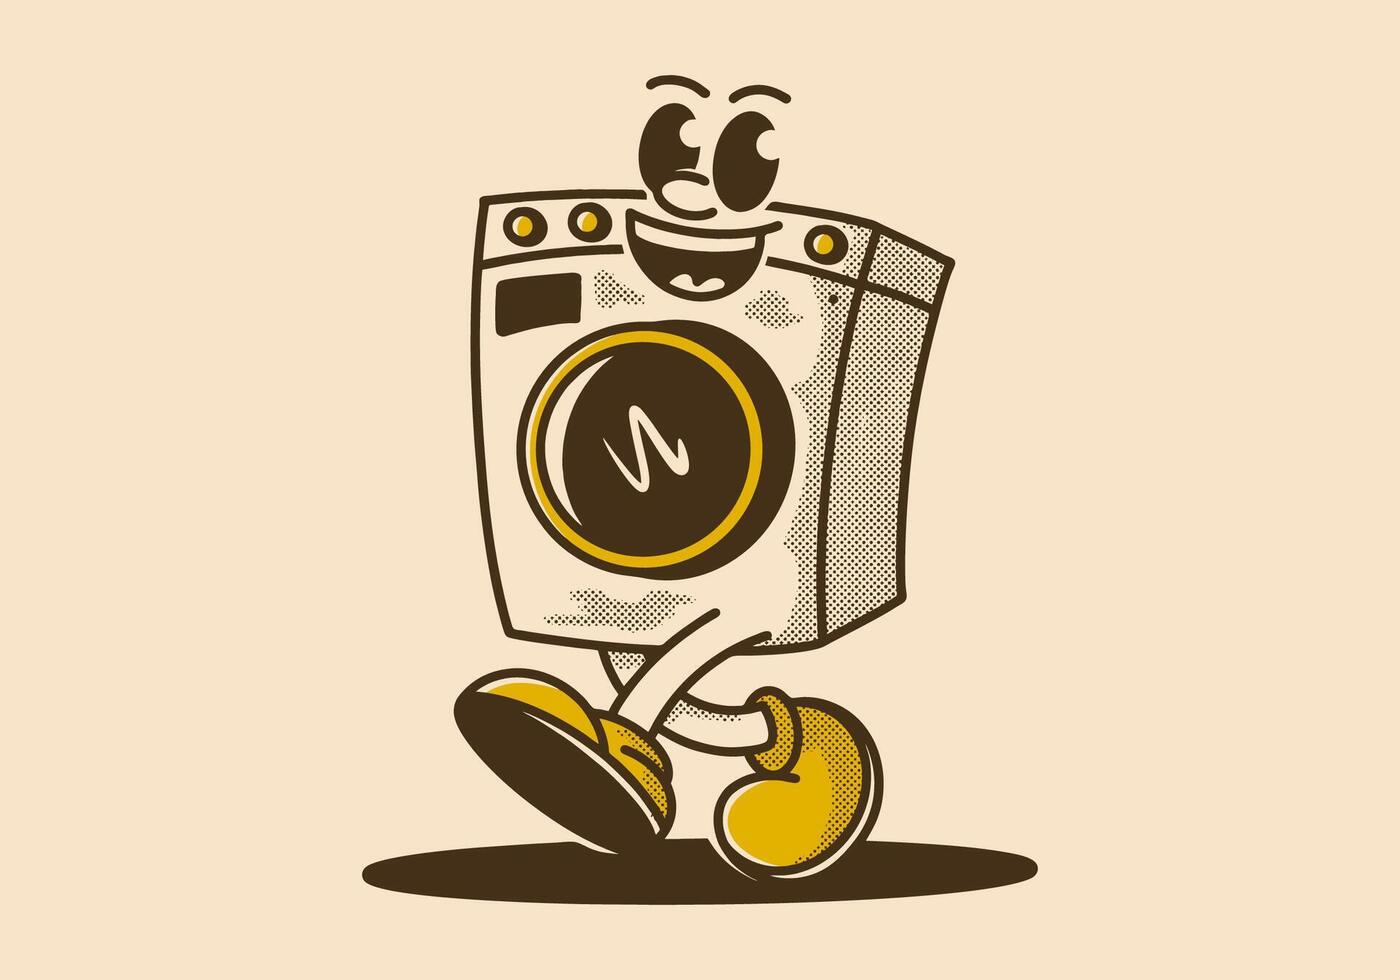 Vintage illustration of walking washing machine mascot character with happy face vector